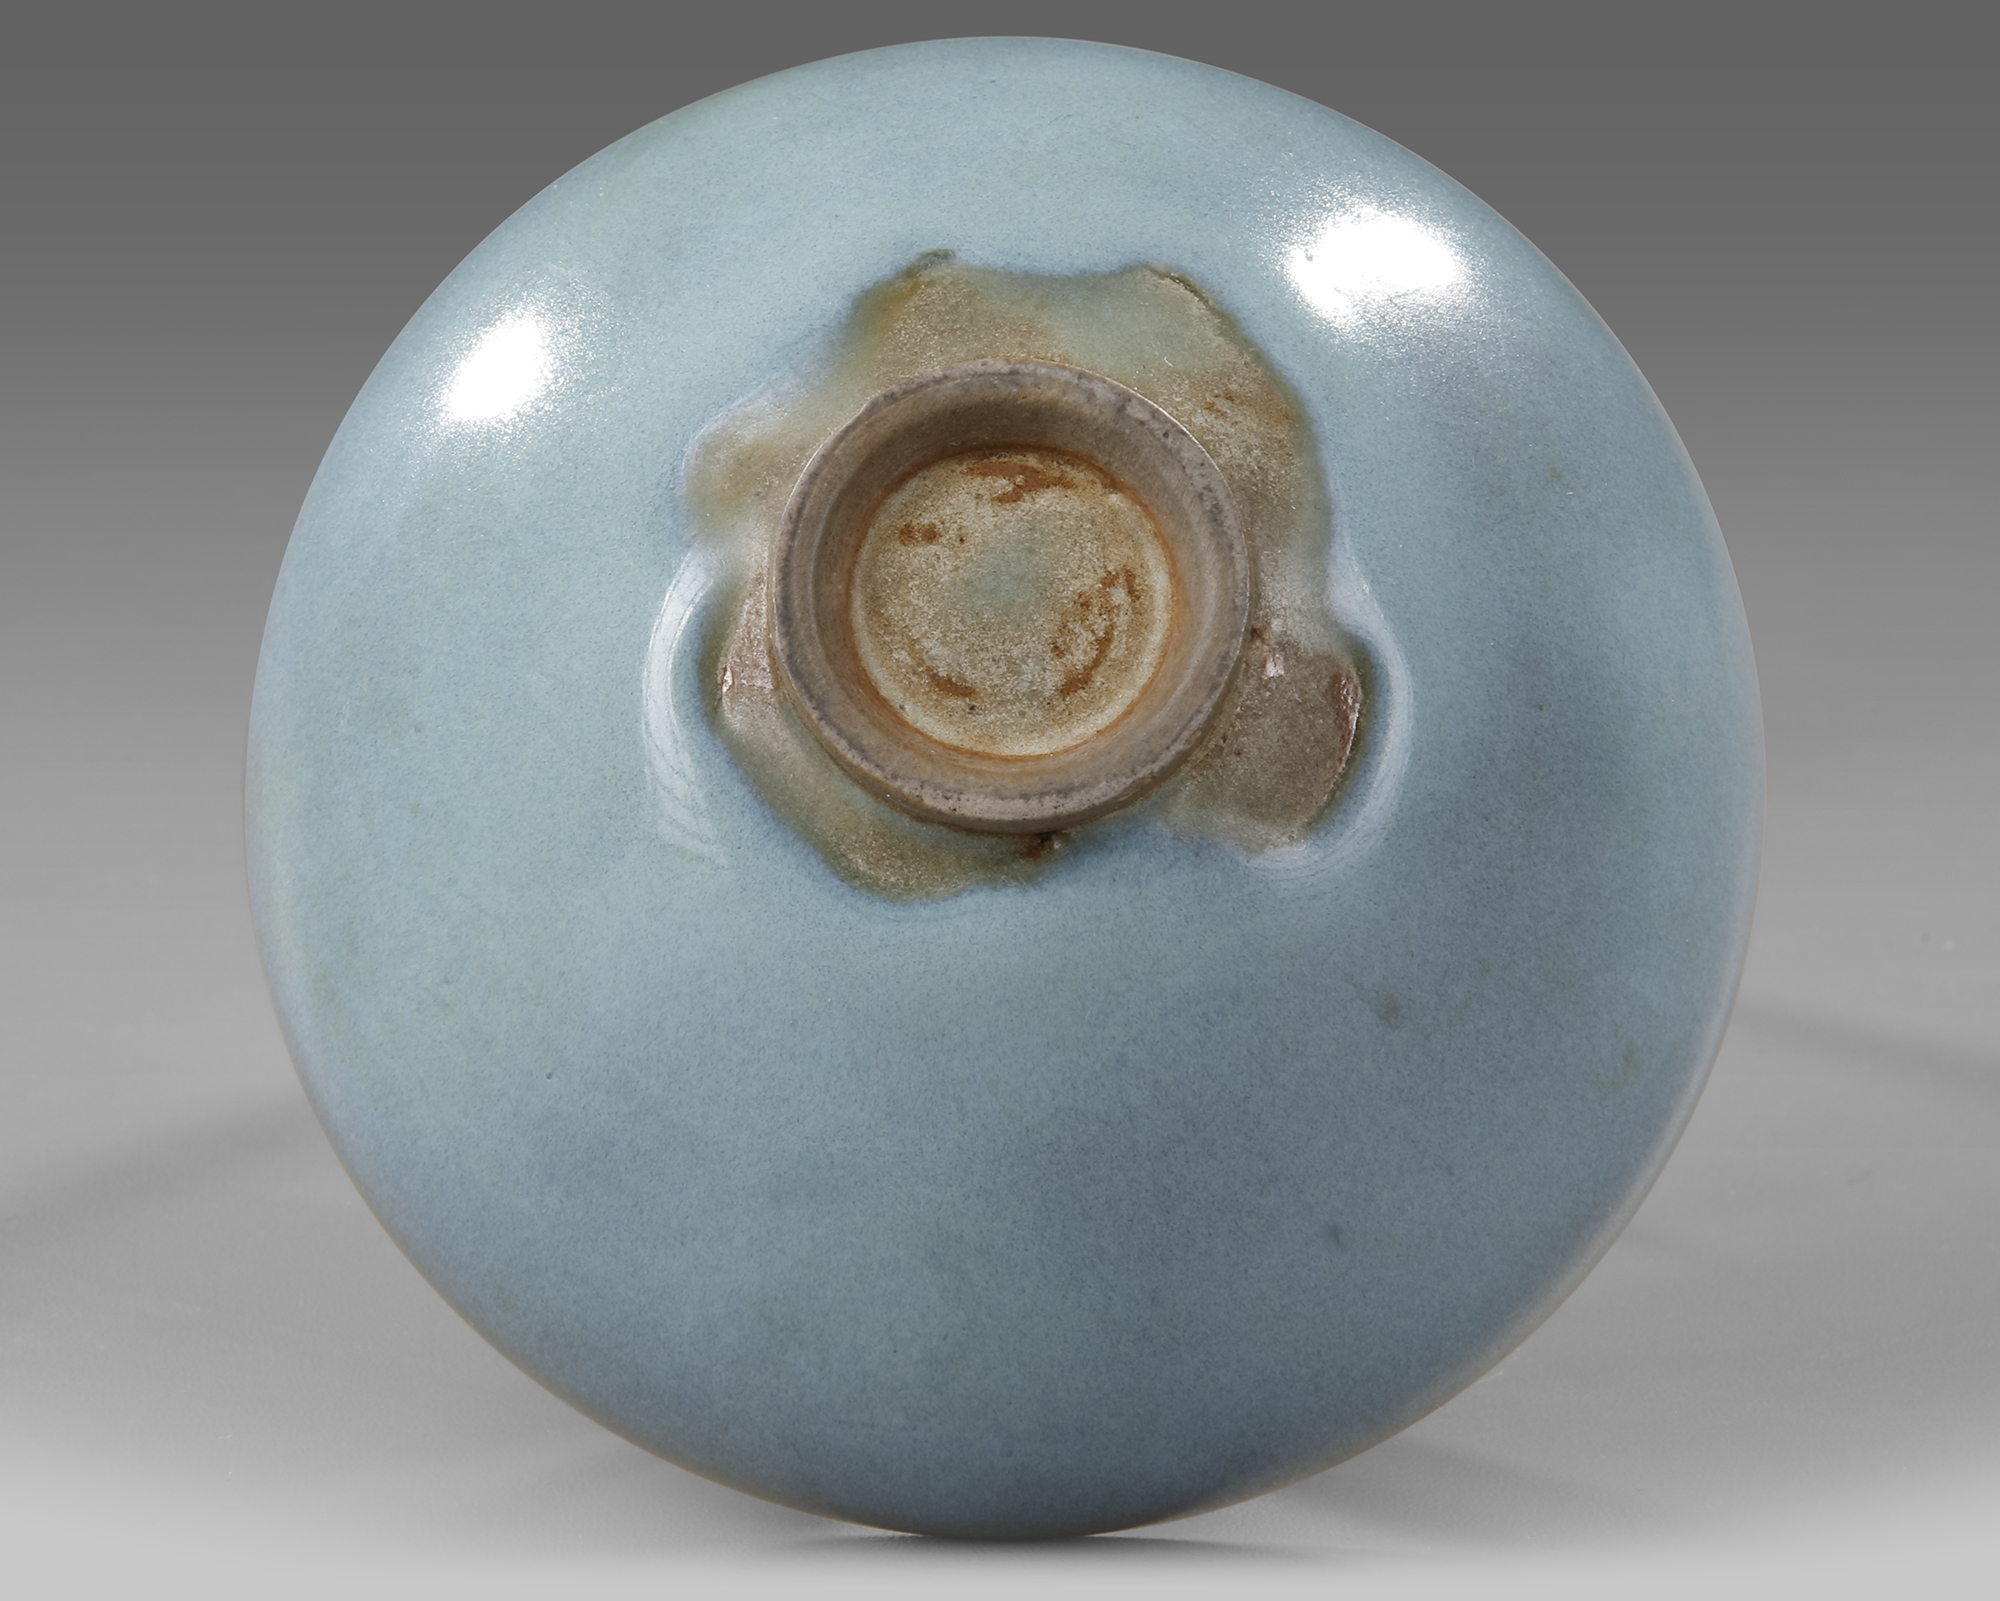 A CHINESE JUNYAO BLUE-GLAZED BOWL, SONG-JIN DYNASTY (11TH-12TH CENTURY) - Image 4 of 5